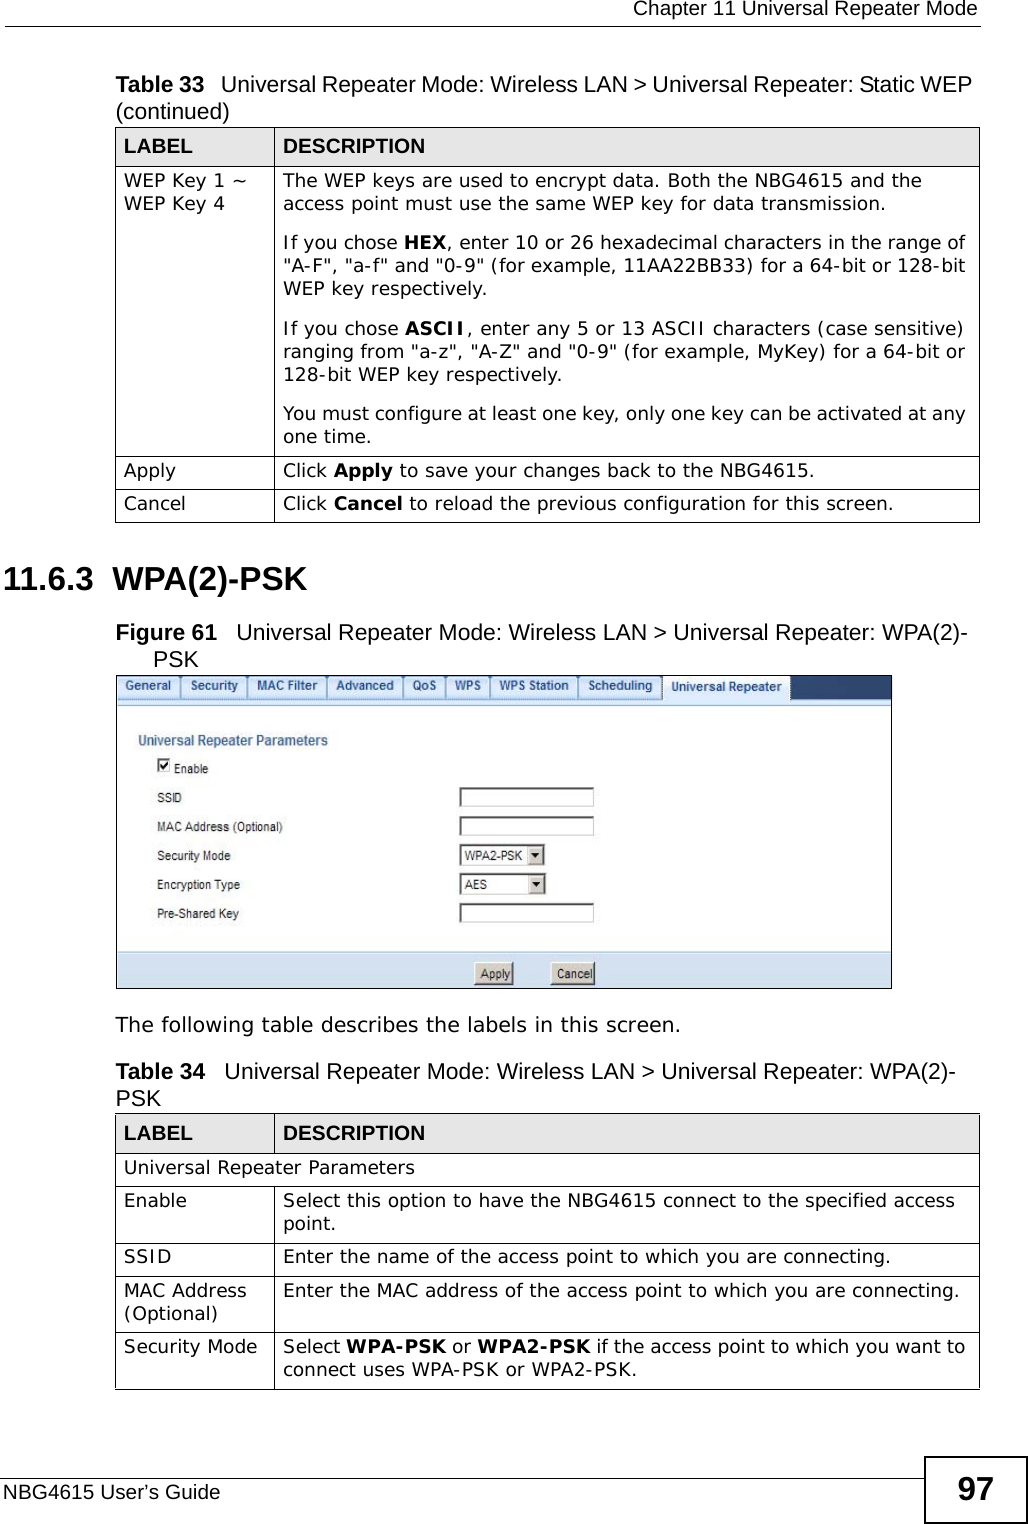  Chapter 11 Universal Repeater ModeNBG4615 User’s Guide 9711.6.3  WPA(2)-PSKFigure 61   Universal Repeater Mode: Wireless LAN &gt; Universal Repeater: WPA(2)-PSK The following table describes the labels in this screen. WEP Key 1 ~ WEP Key 4 The WEP keys are used to encrypt data. Both the NBG4615 and the access point must use the same WEP key for data transmission.If you chose HEX, enter 10 or 26 hexadecimal characters in the range of &quot;A-F&quot;, &quot;a-f&quot; and &quot;0-9&quot; (for example, 11AA22BB33) for a 64-bit or 128-bit WEP key respectively.If you chose ASCII, enter any 5 or 13 ASCII characters (case sensitive) ranging from &quot;a-z&quot;, &quot;A-Z&quot; and &quot;0-9&quot; (for example, MyKey) for a 64-bit or 128-bit WEP key respectively. You must configure at least one key, only one key can be activated at any one time.Apply Click Apply to save your changes back to the NBG4615.Cancel Click Cancel to reload the previous configuration for this screen.Table 33   Universal Repeater Mode: Wireless LAN &gt; Universal Repeater: Static WEP (continued)LABEL  DESCRIPTIONTable 34   Universal Repeater Mode: Wireless LAN &gt; Universal Repeater: WPA(2)-PSKLABEL  DESCRIPTIONUniversal Repeater Parameters Enable  Select this option to have the NBG4615 connect to the specified access point.SSID Enter the name of the access point to which you are connecting.MAC Address (Optional) Enter the MAC address of the access point to which you are connecting.Security Mode Select WPA-PSK or WPA2-PSK if the access point to which you want to connect uses WPA-PSK or WPA2-PSK.